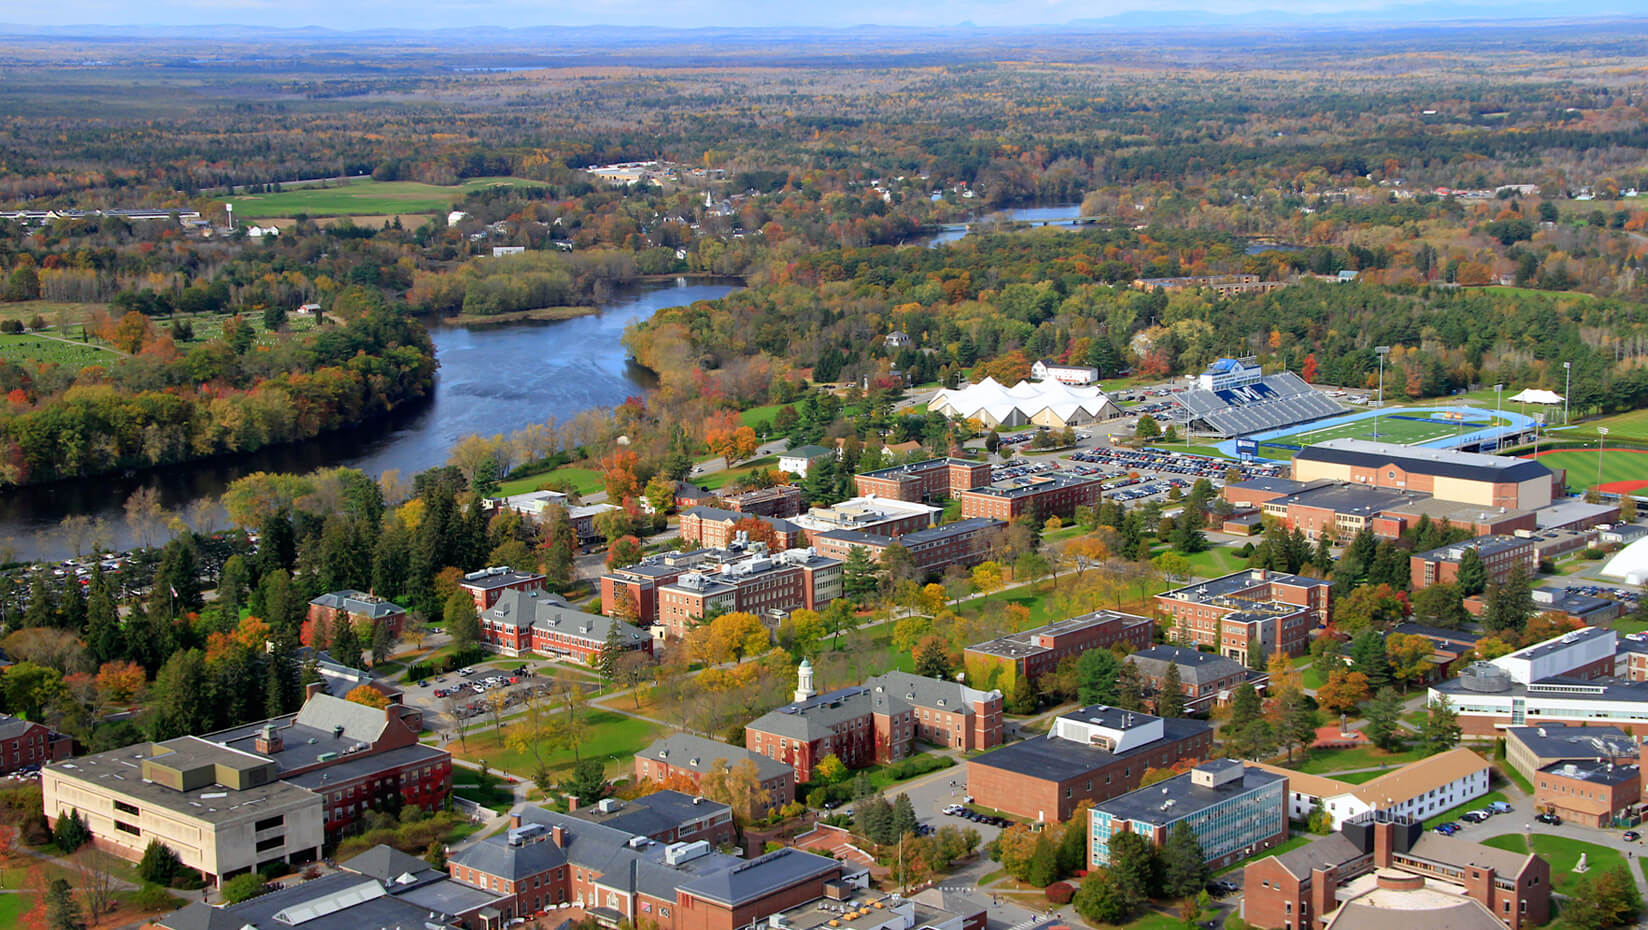 Arial view of the University of Maine Campus